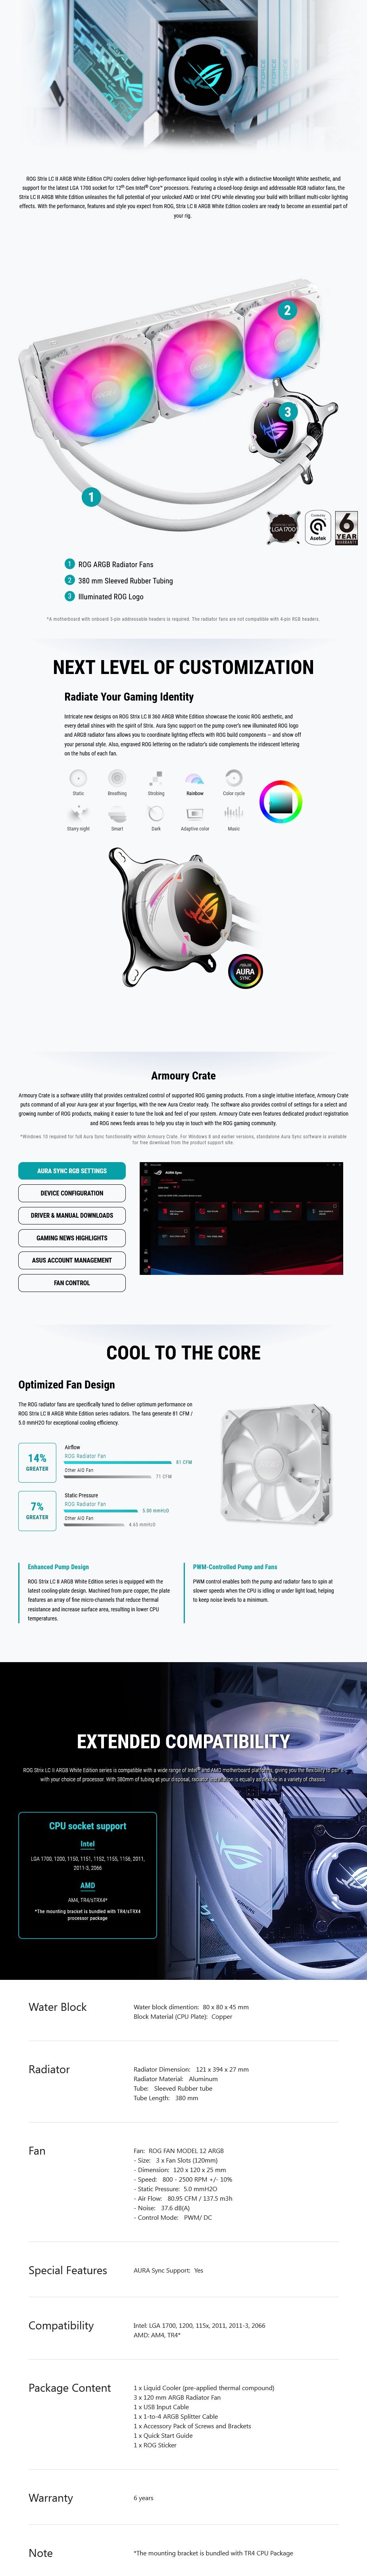 A large marketing image providing additional information about the product ASUS ROG Strix LC II 360 ARGB 360mm AIO CPU Cooler - White - Additional alt info not provided